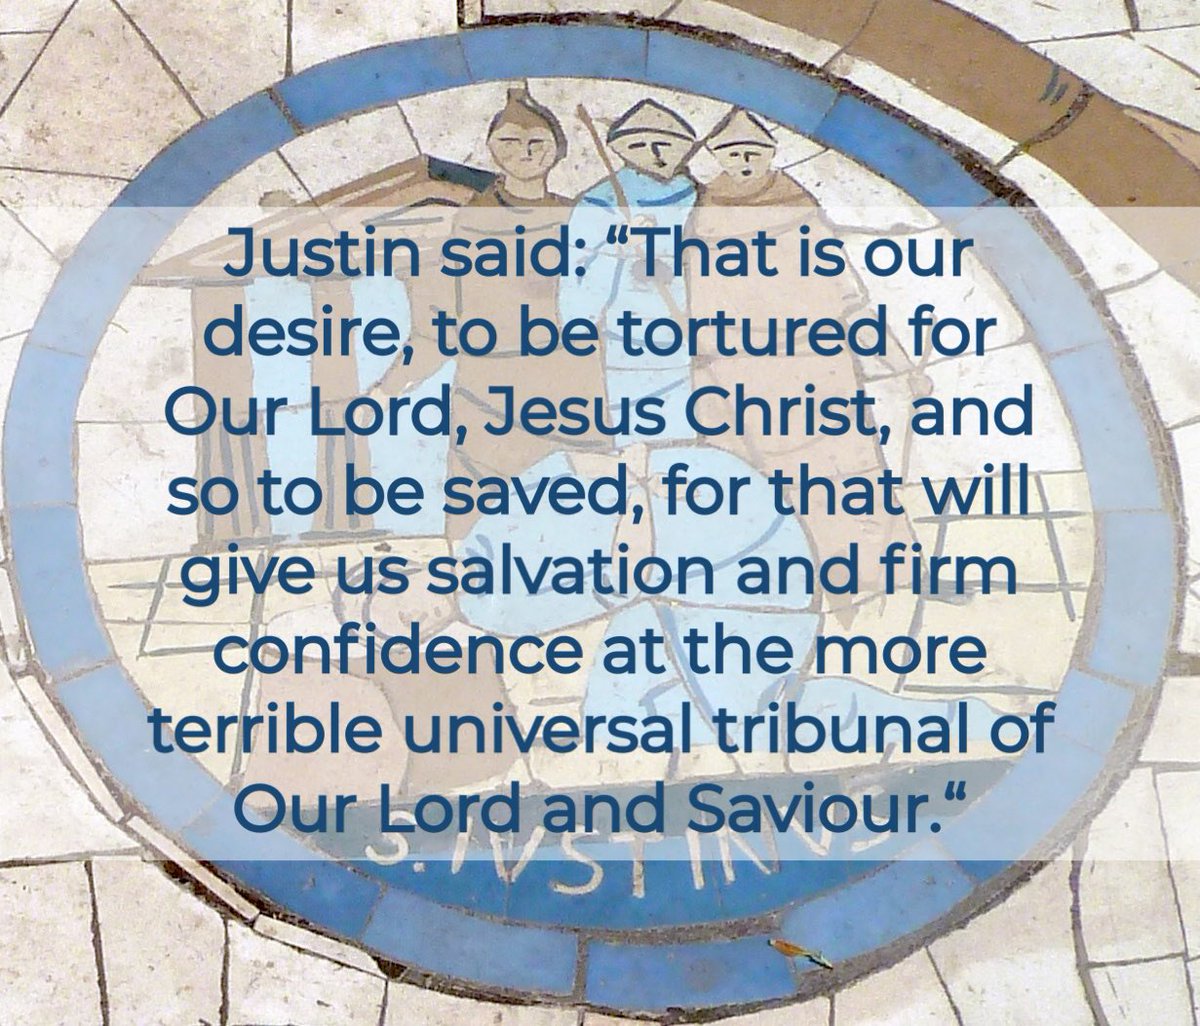 Today is the Feast of St. Justin Martyr: Born in 100 AD, he was a philosopher converted from paganism to belief in the true religion of Christ. He is best known for his Apologies, letters to the Roman Emperor defending the faith. He was martyred in 160 for refusing to apostatize.